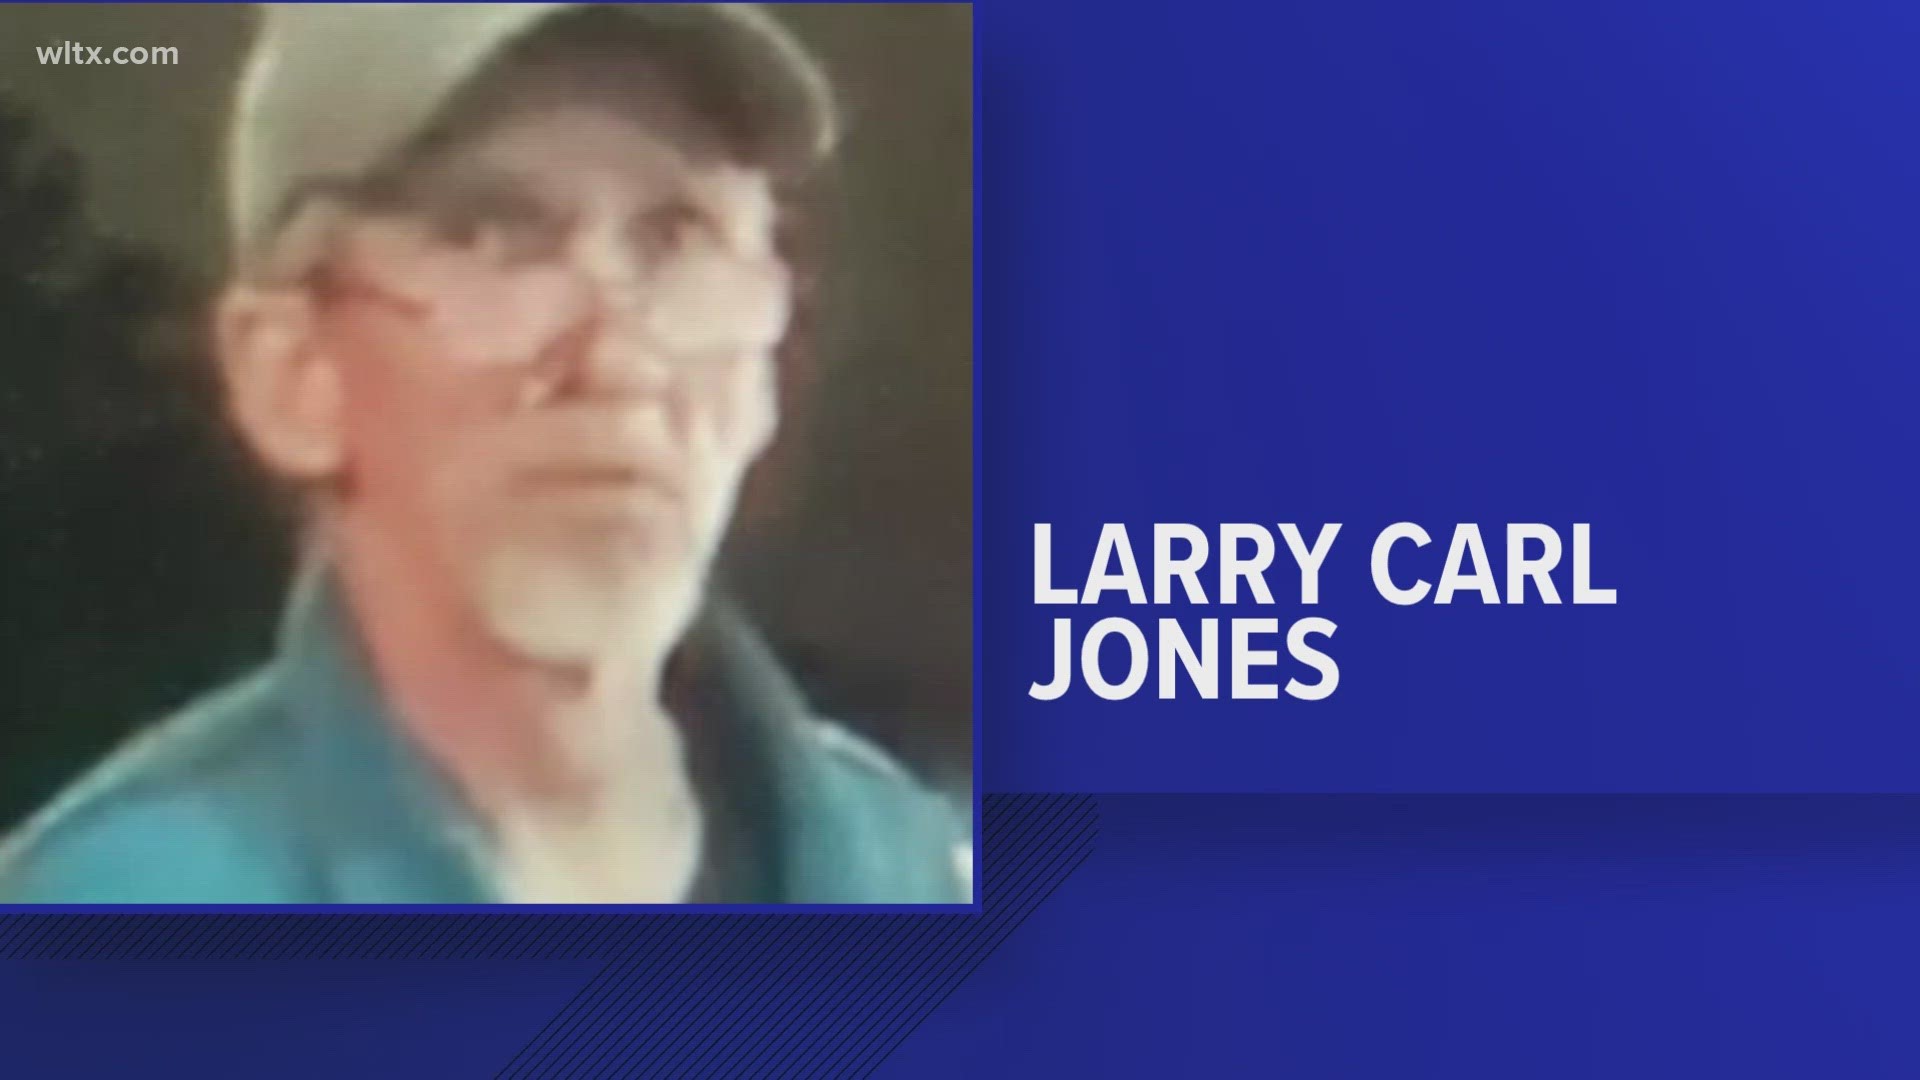 A man reported missing in Orangeburg on Tuesday has now been found safe, according to police.